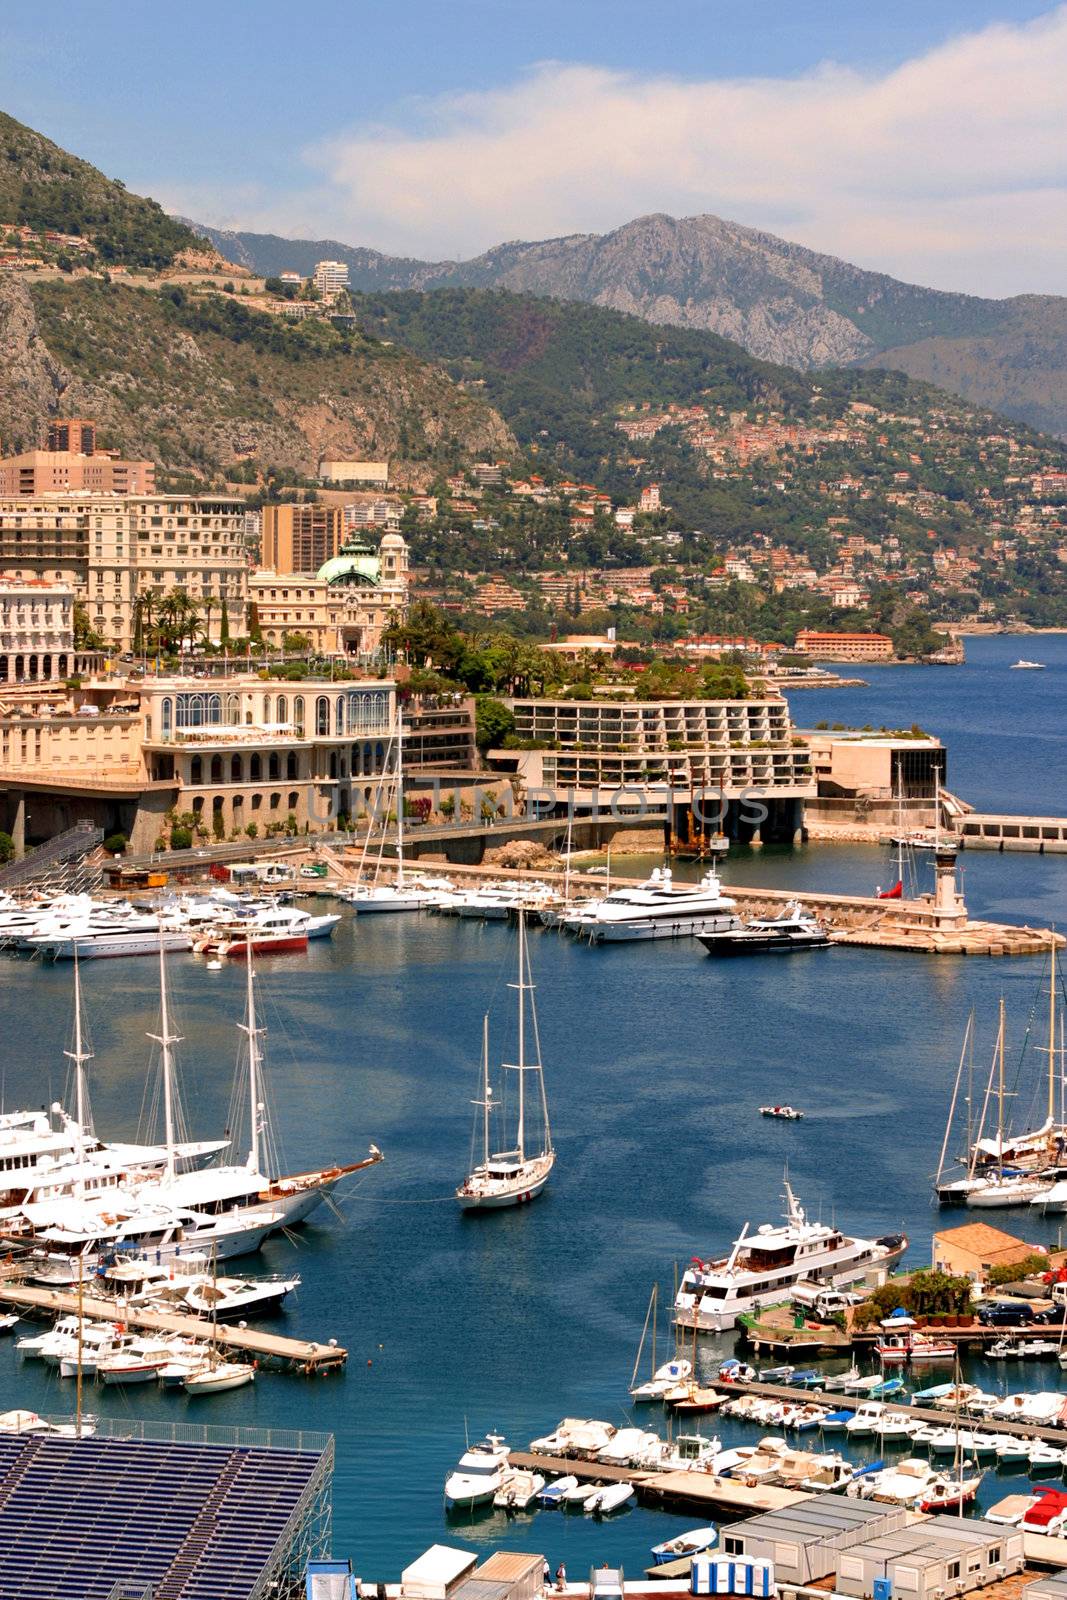 Scenic view of Monaca harbor in the south of France.